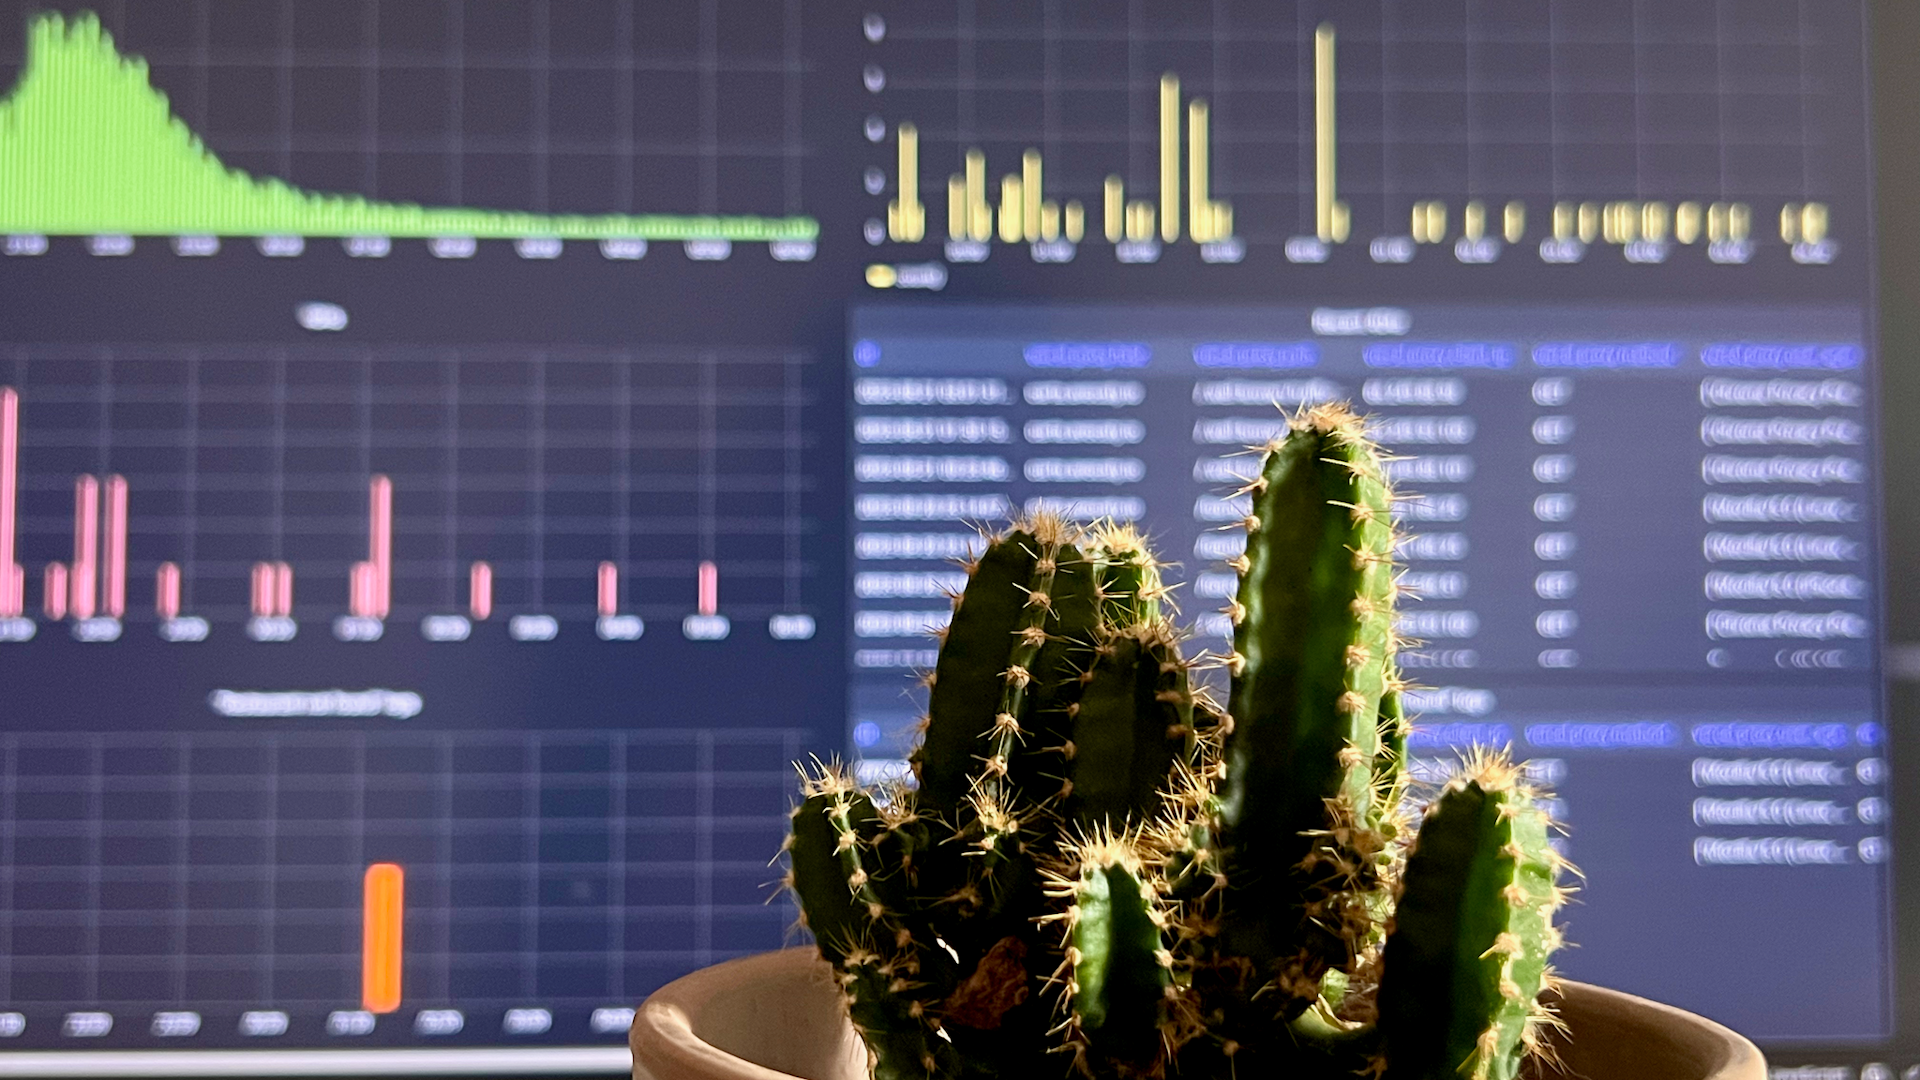 The cute cactus that keeps me company while I look at metrics in Grafana 🌵